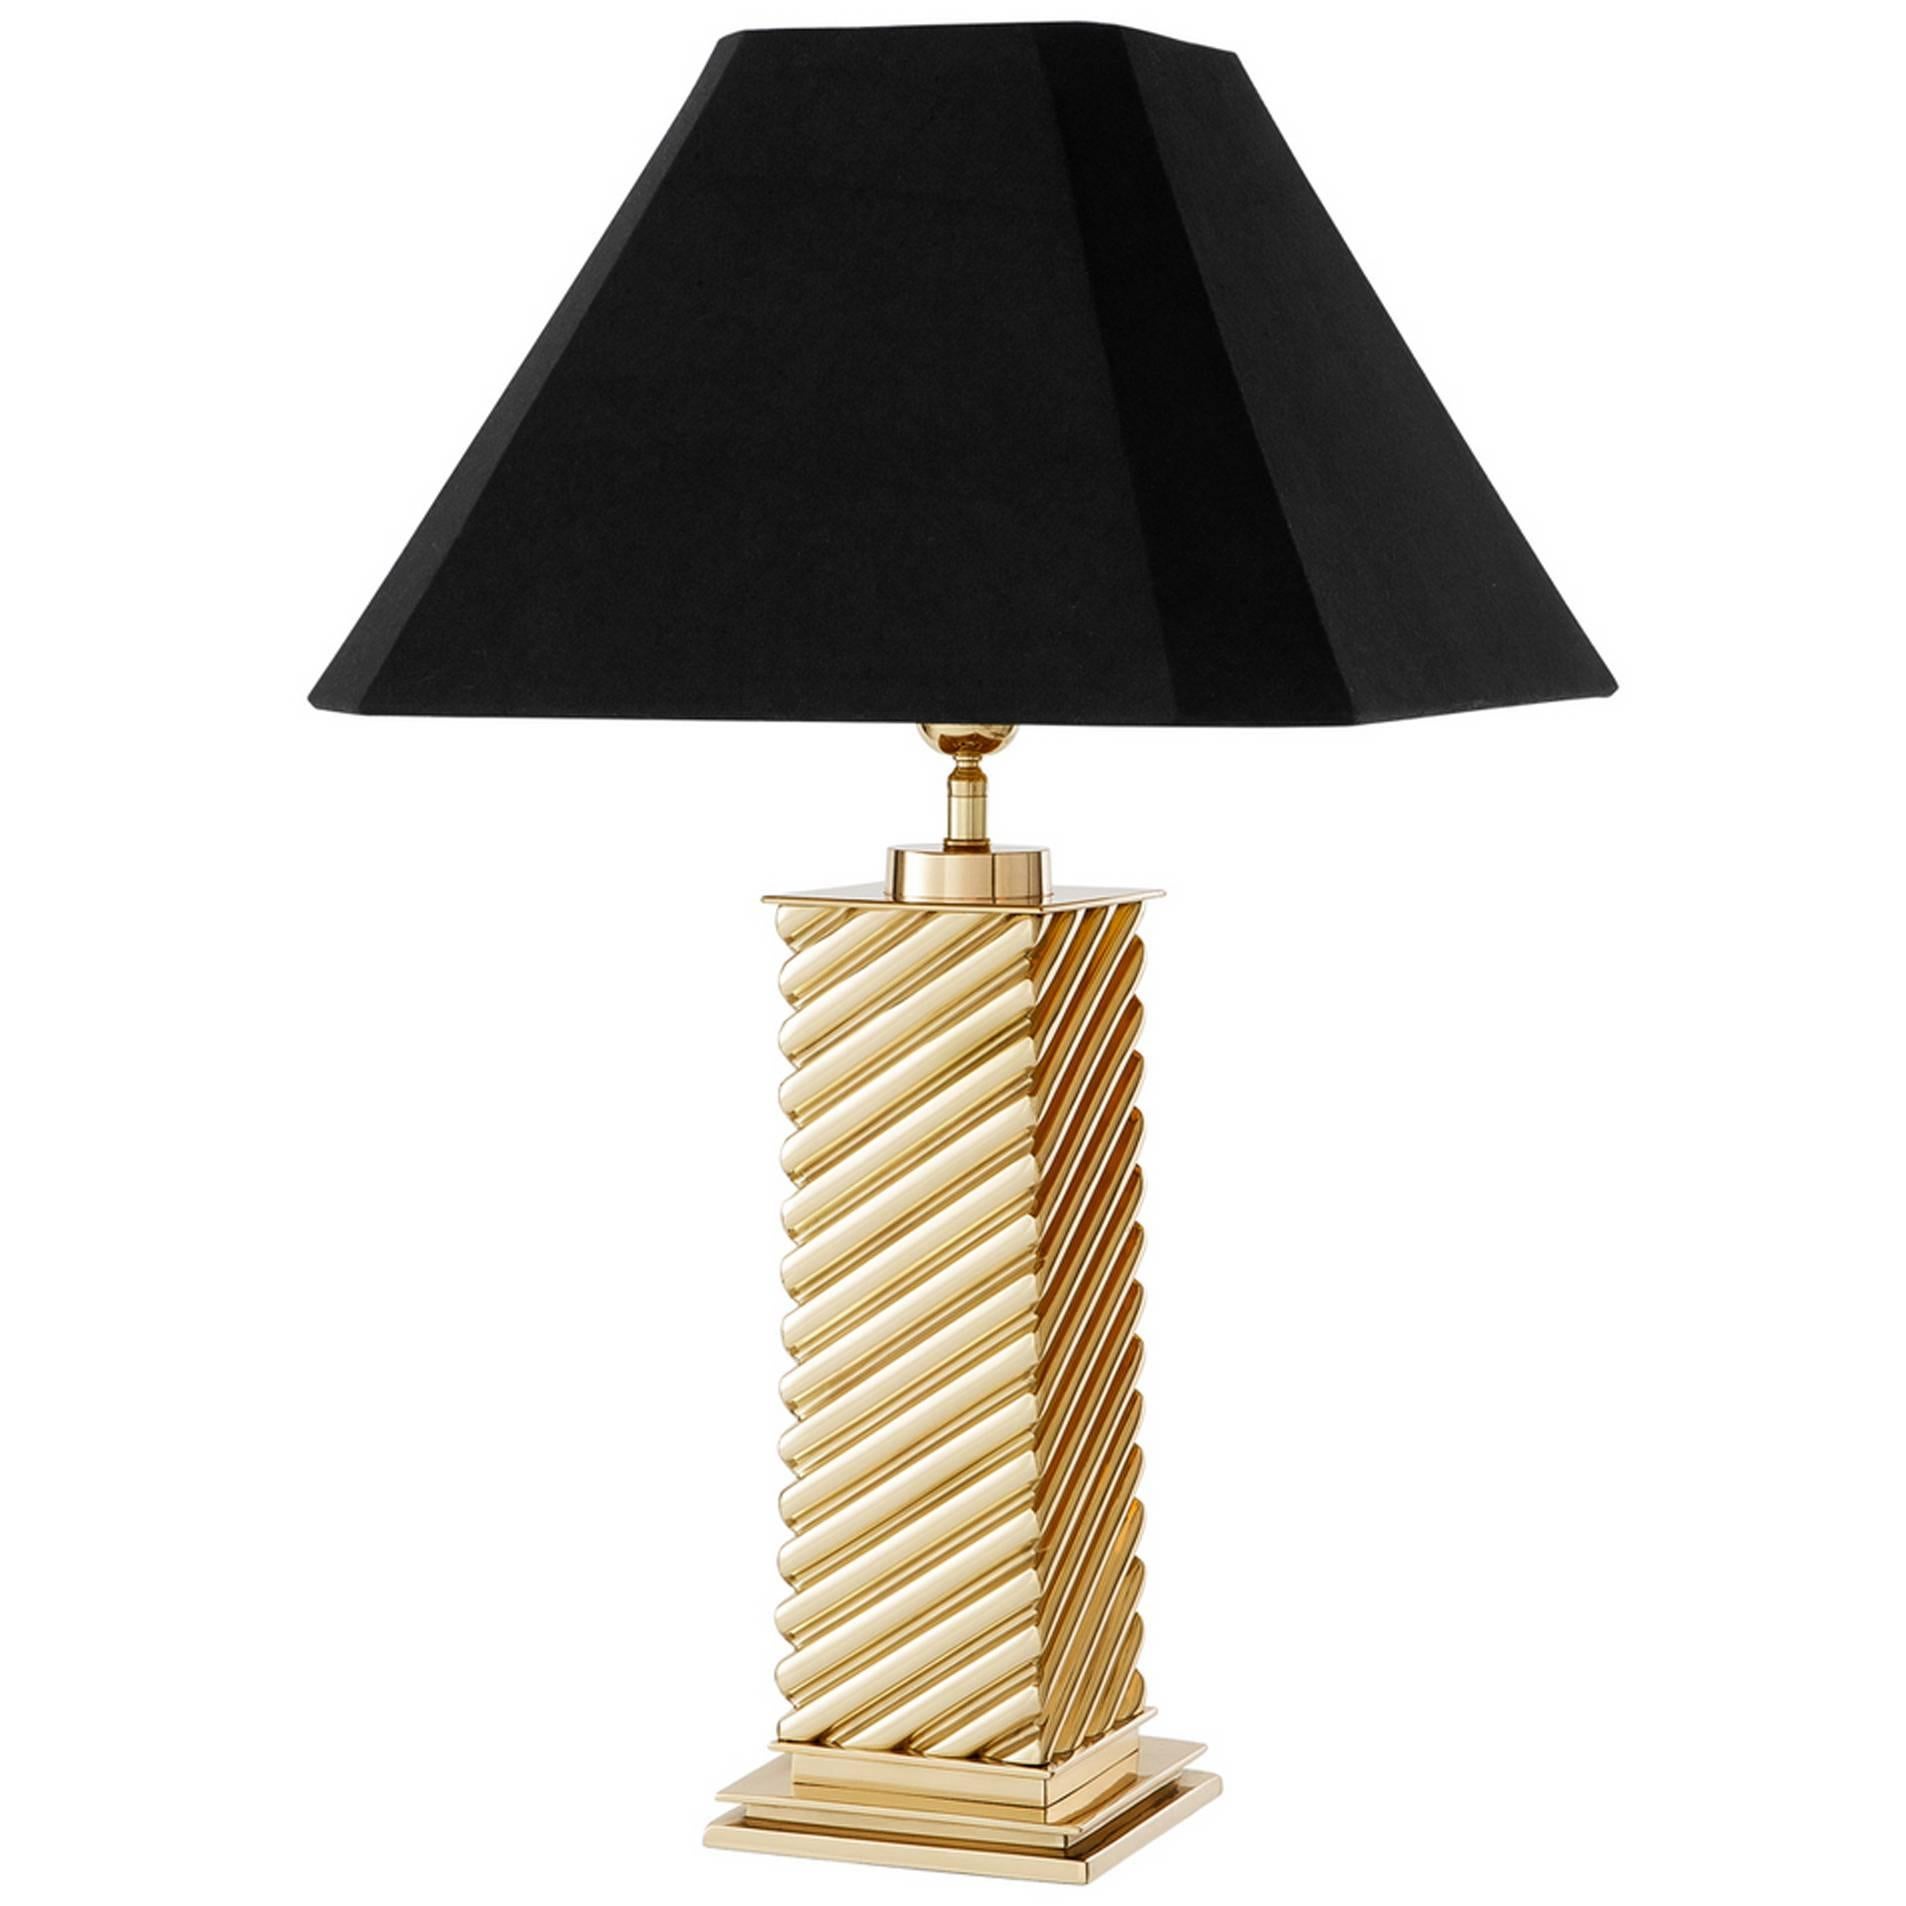 Column Lamp in Polished Brass and Black Shade